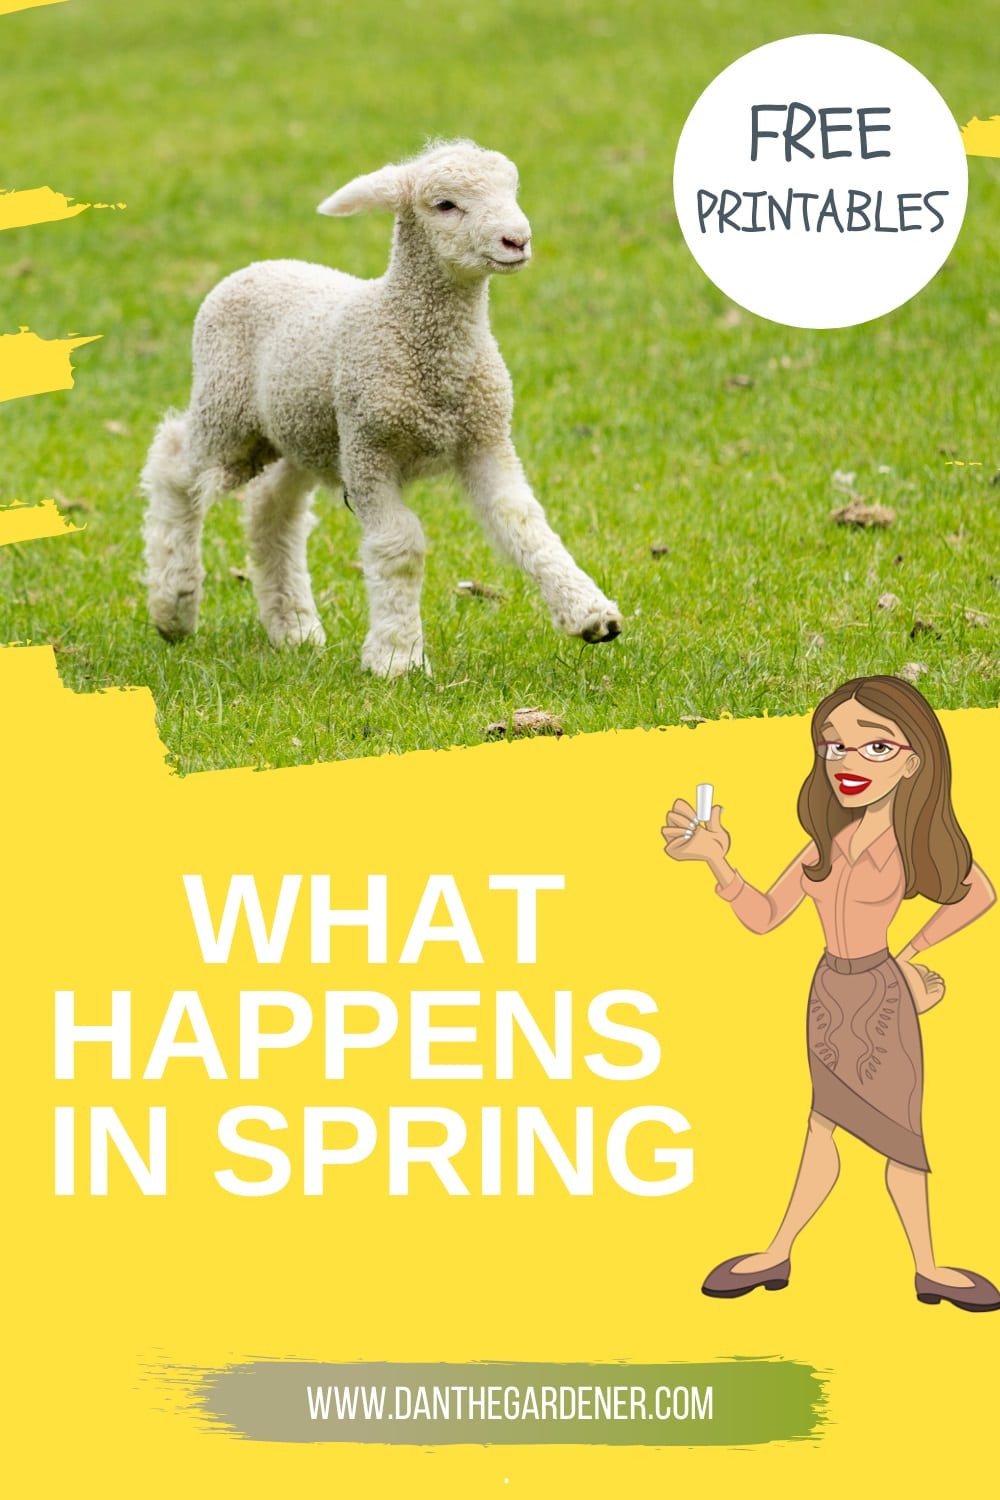 What happens in spring